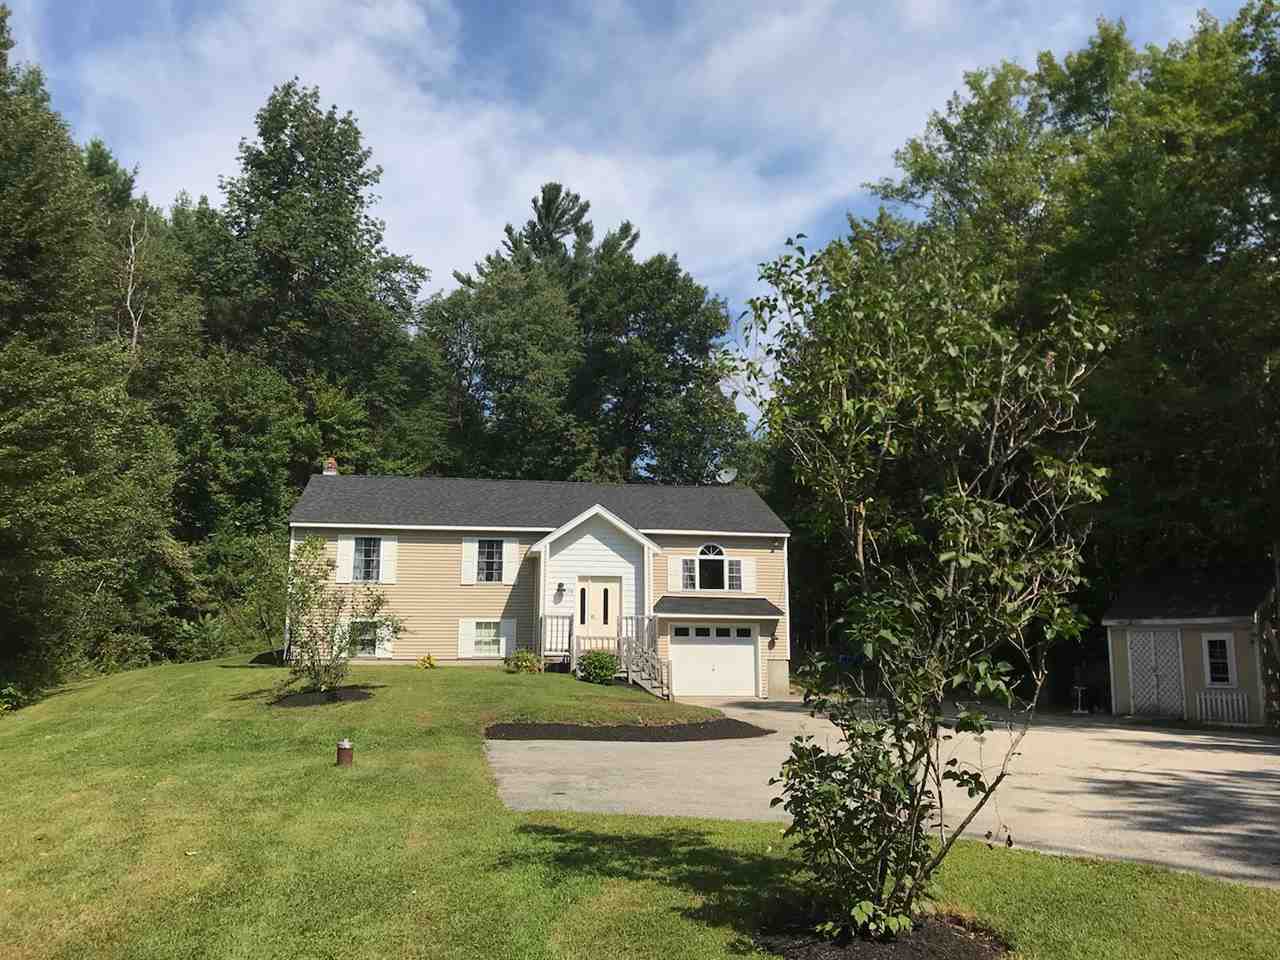 175　Perry　NH　Rd,　4710628　Rindge,　03461　MLS#　Redfin